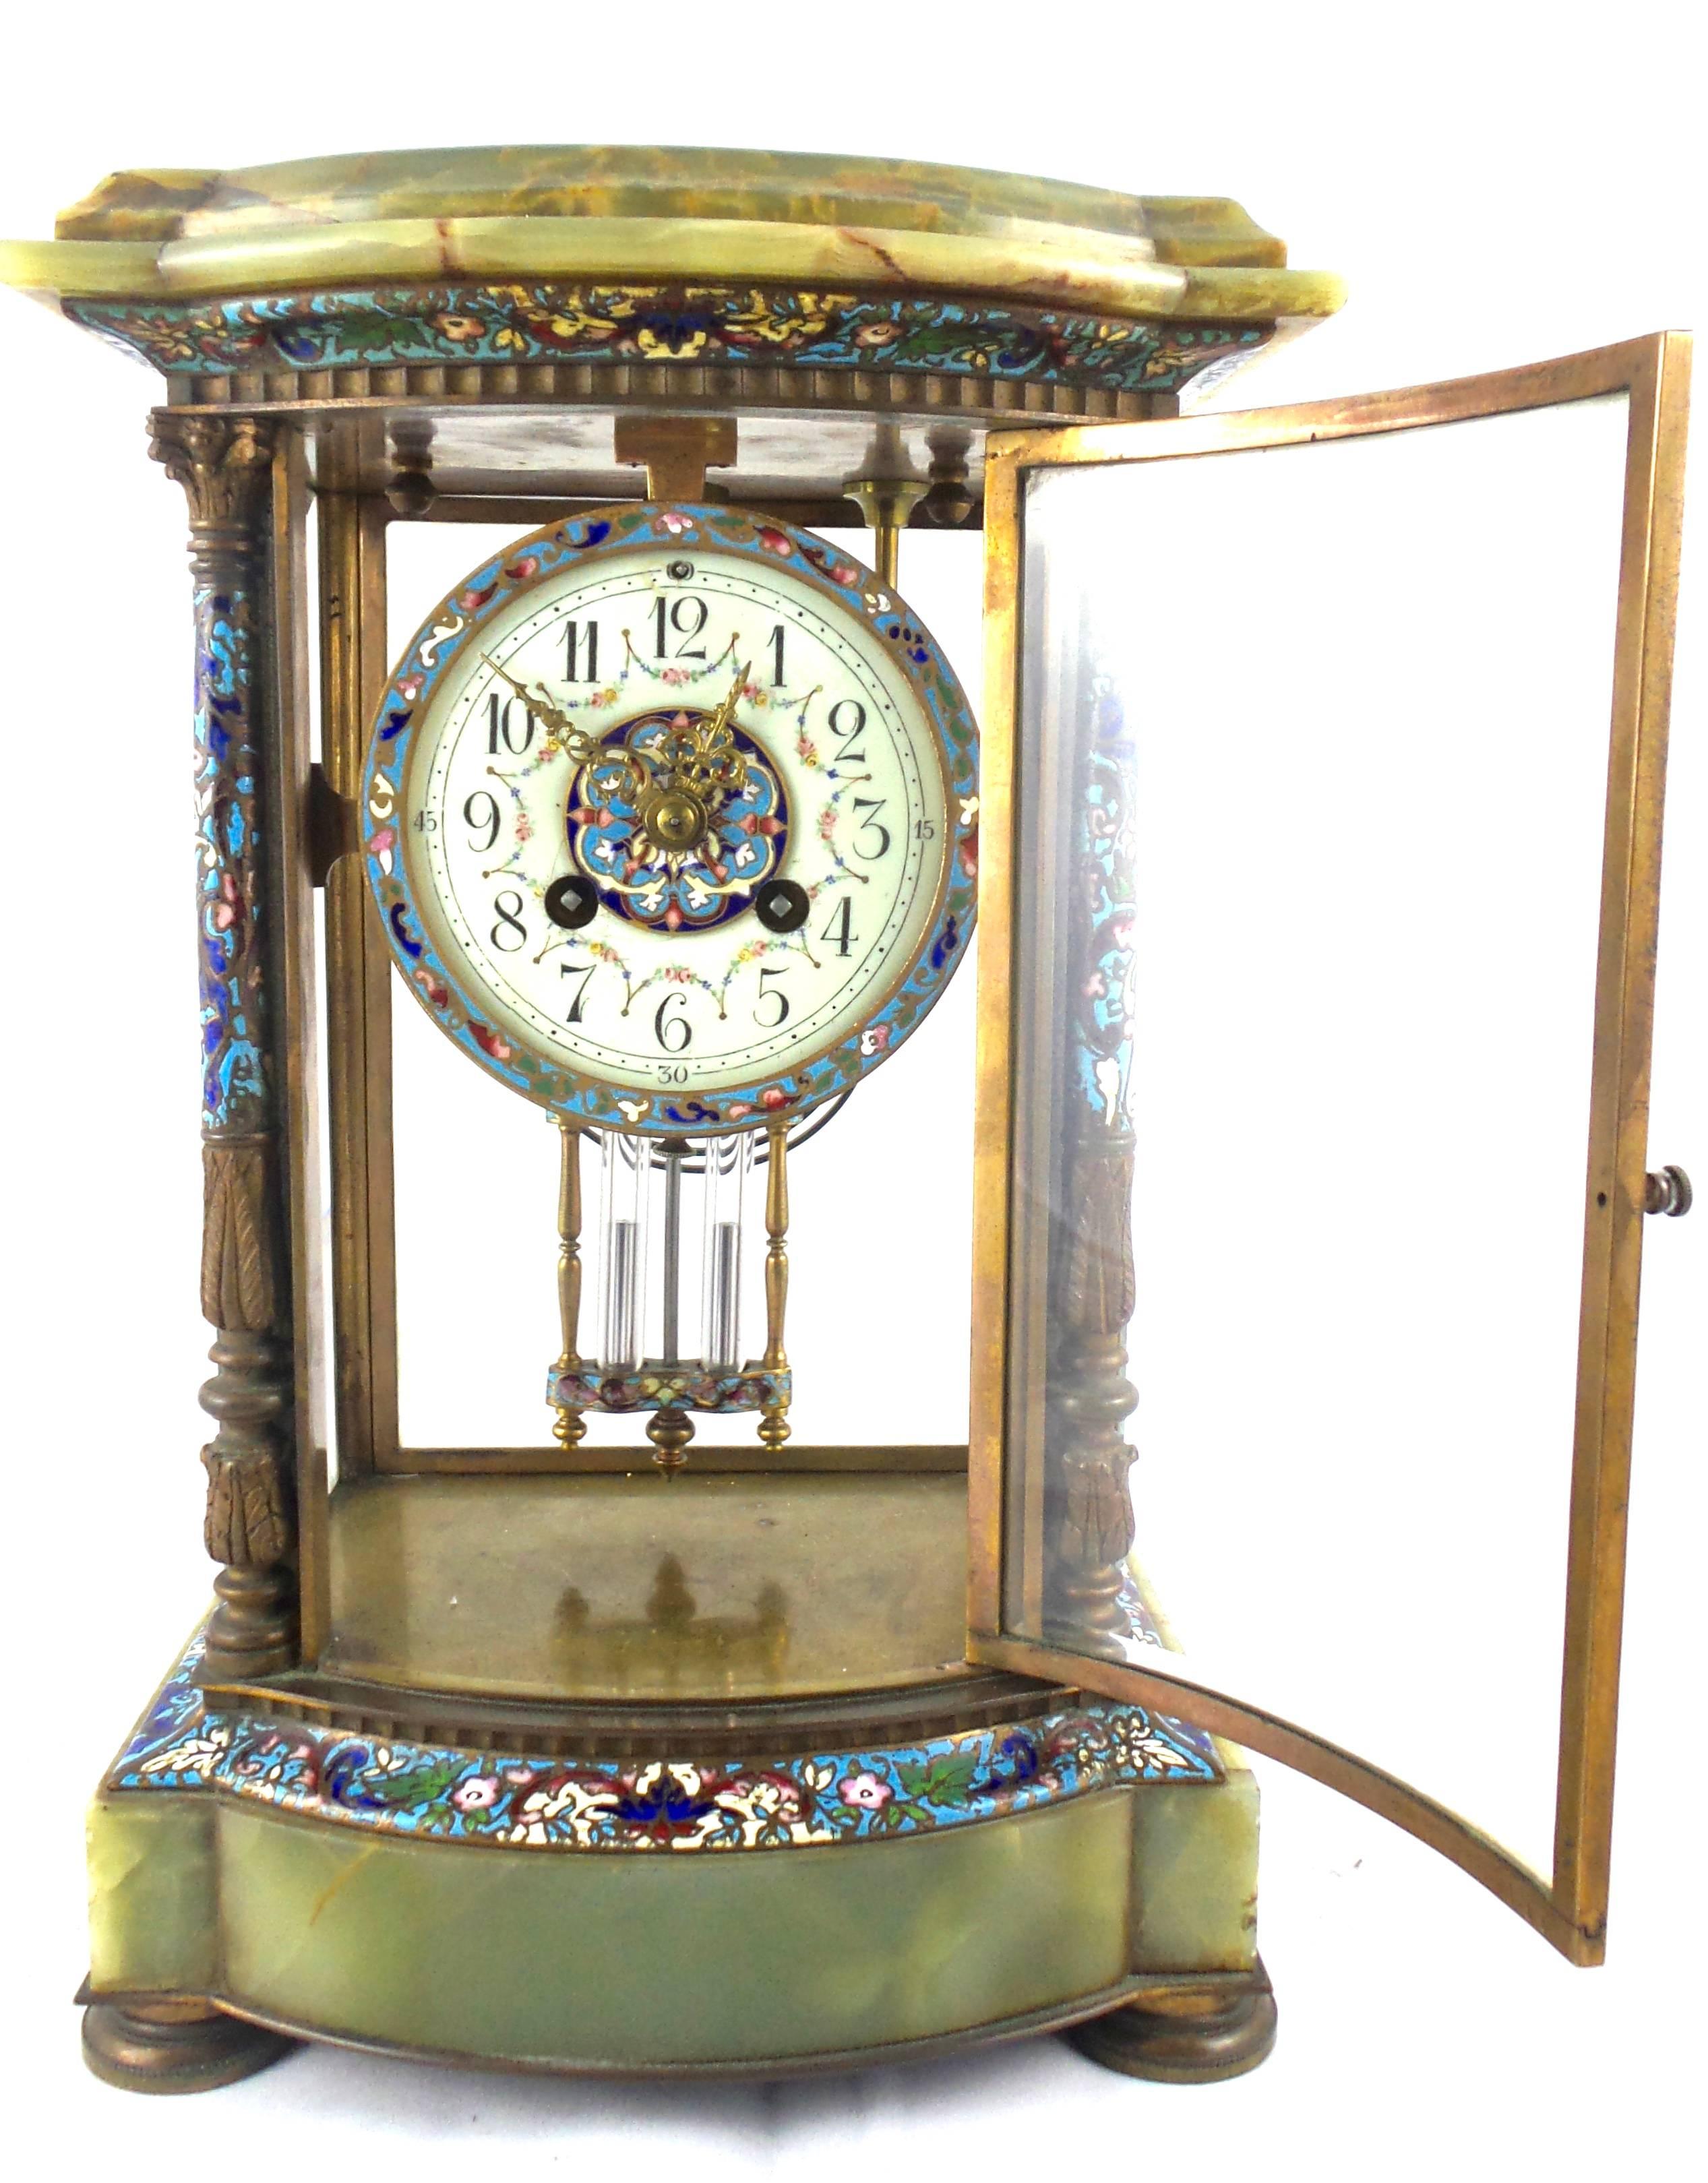 This is an antique 19th century French mantel clock of excellent quality by Japy Freres
A four glass crystal regulator clock in onyx with champleve enamel trims
A full length bevelled and curved front glass door and full length bevelled glass